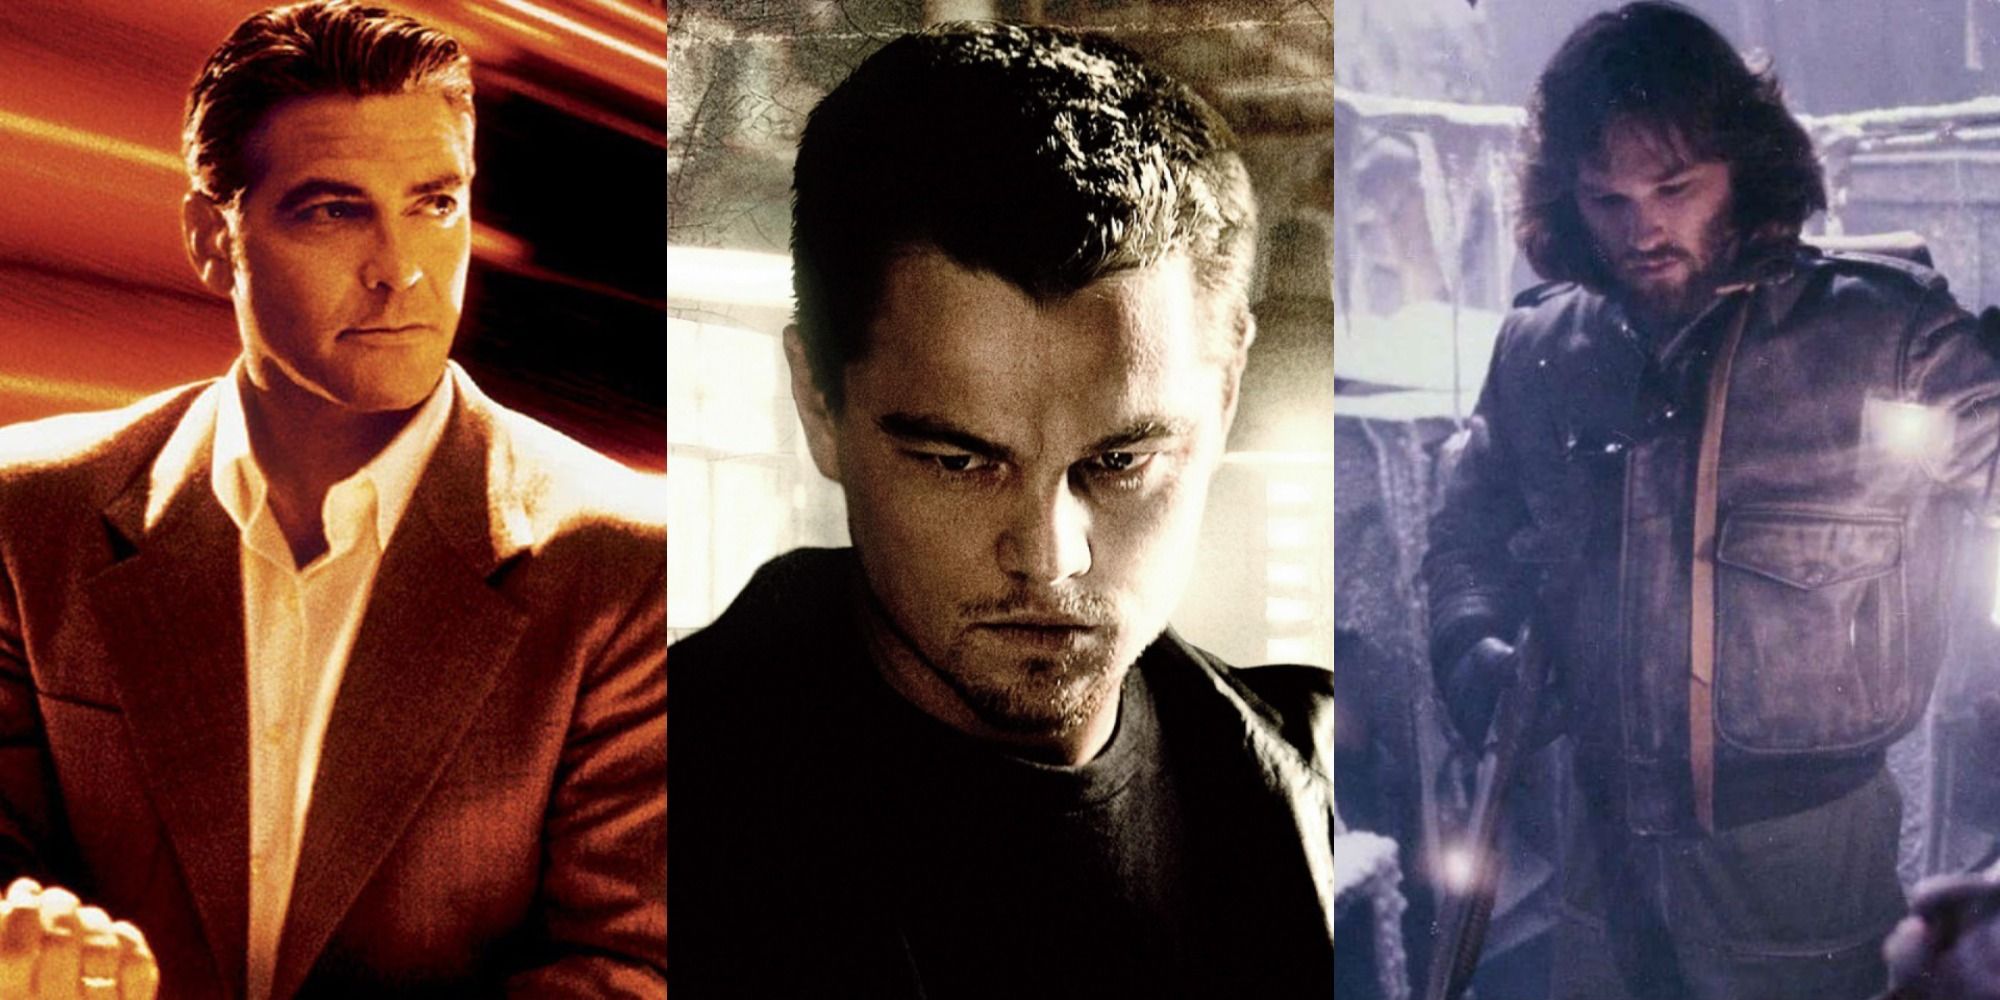 Split image of promo shots from Ocean's Eleven, The Departed, and The Thing